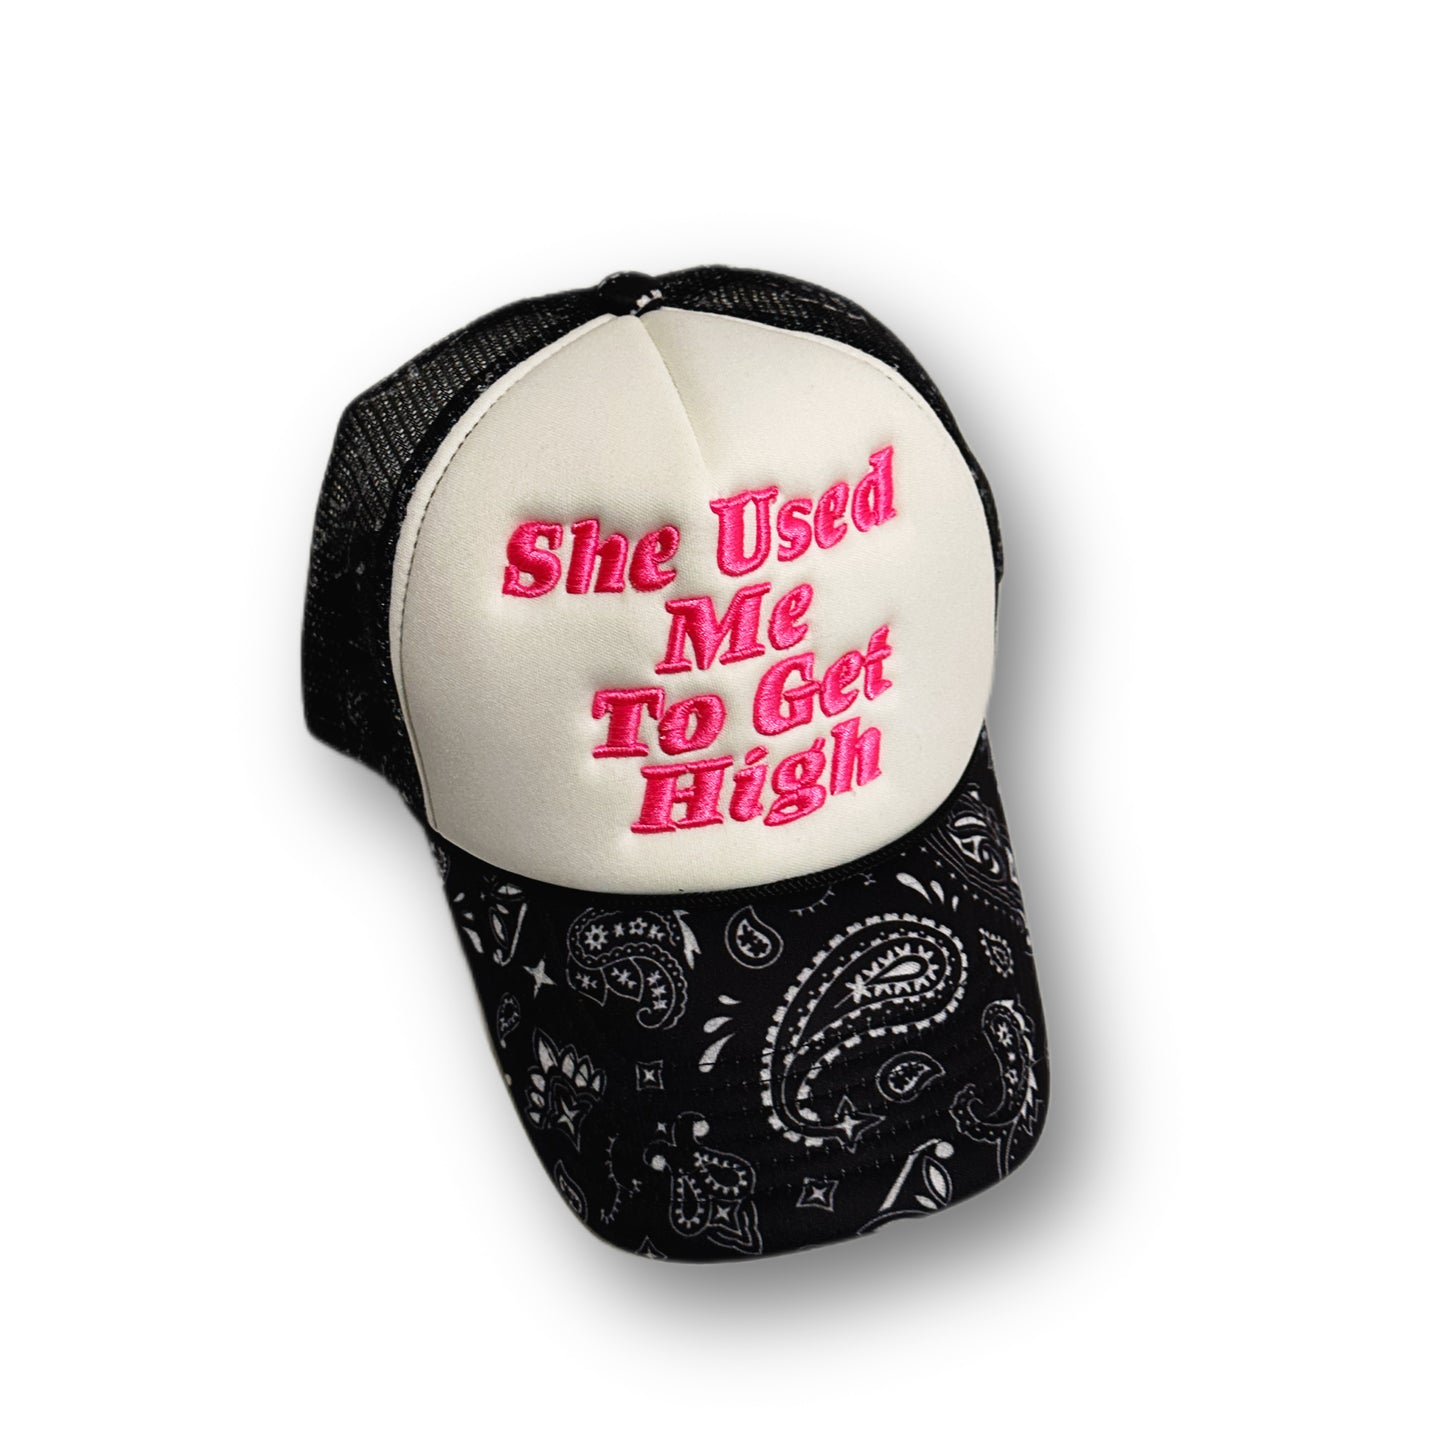 “She Used Me To Get High” Trucker Hat